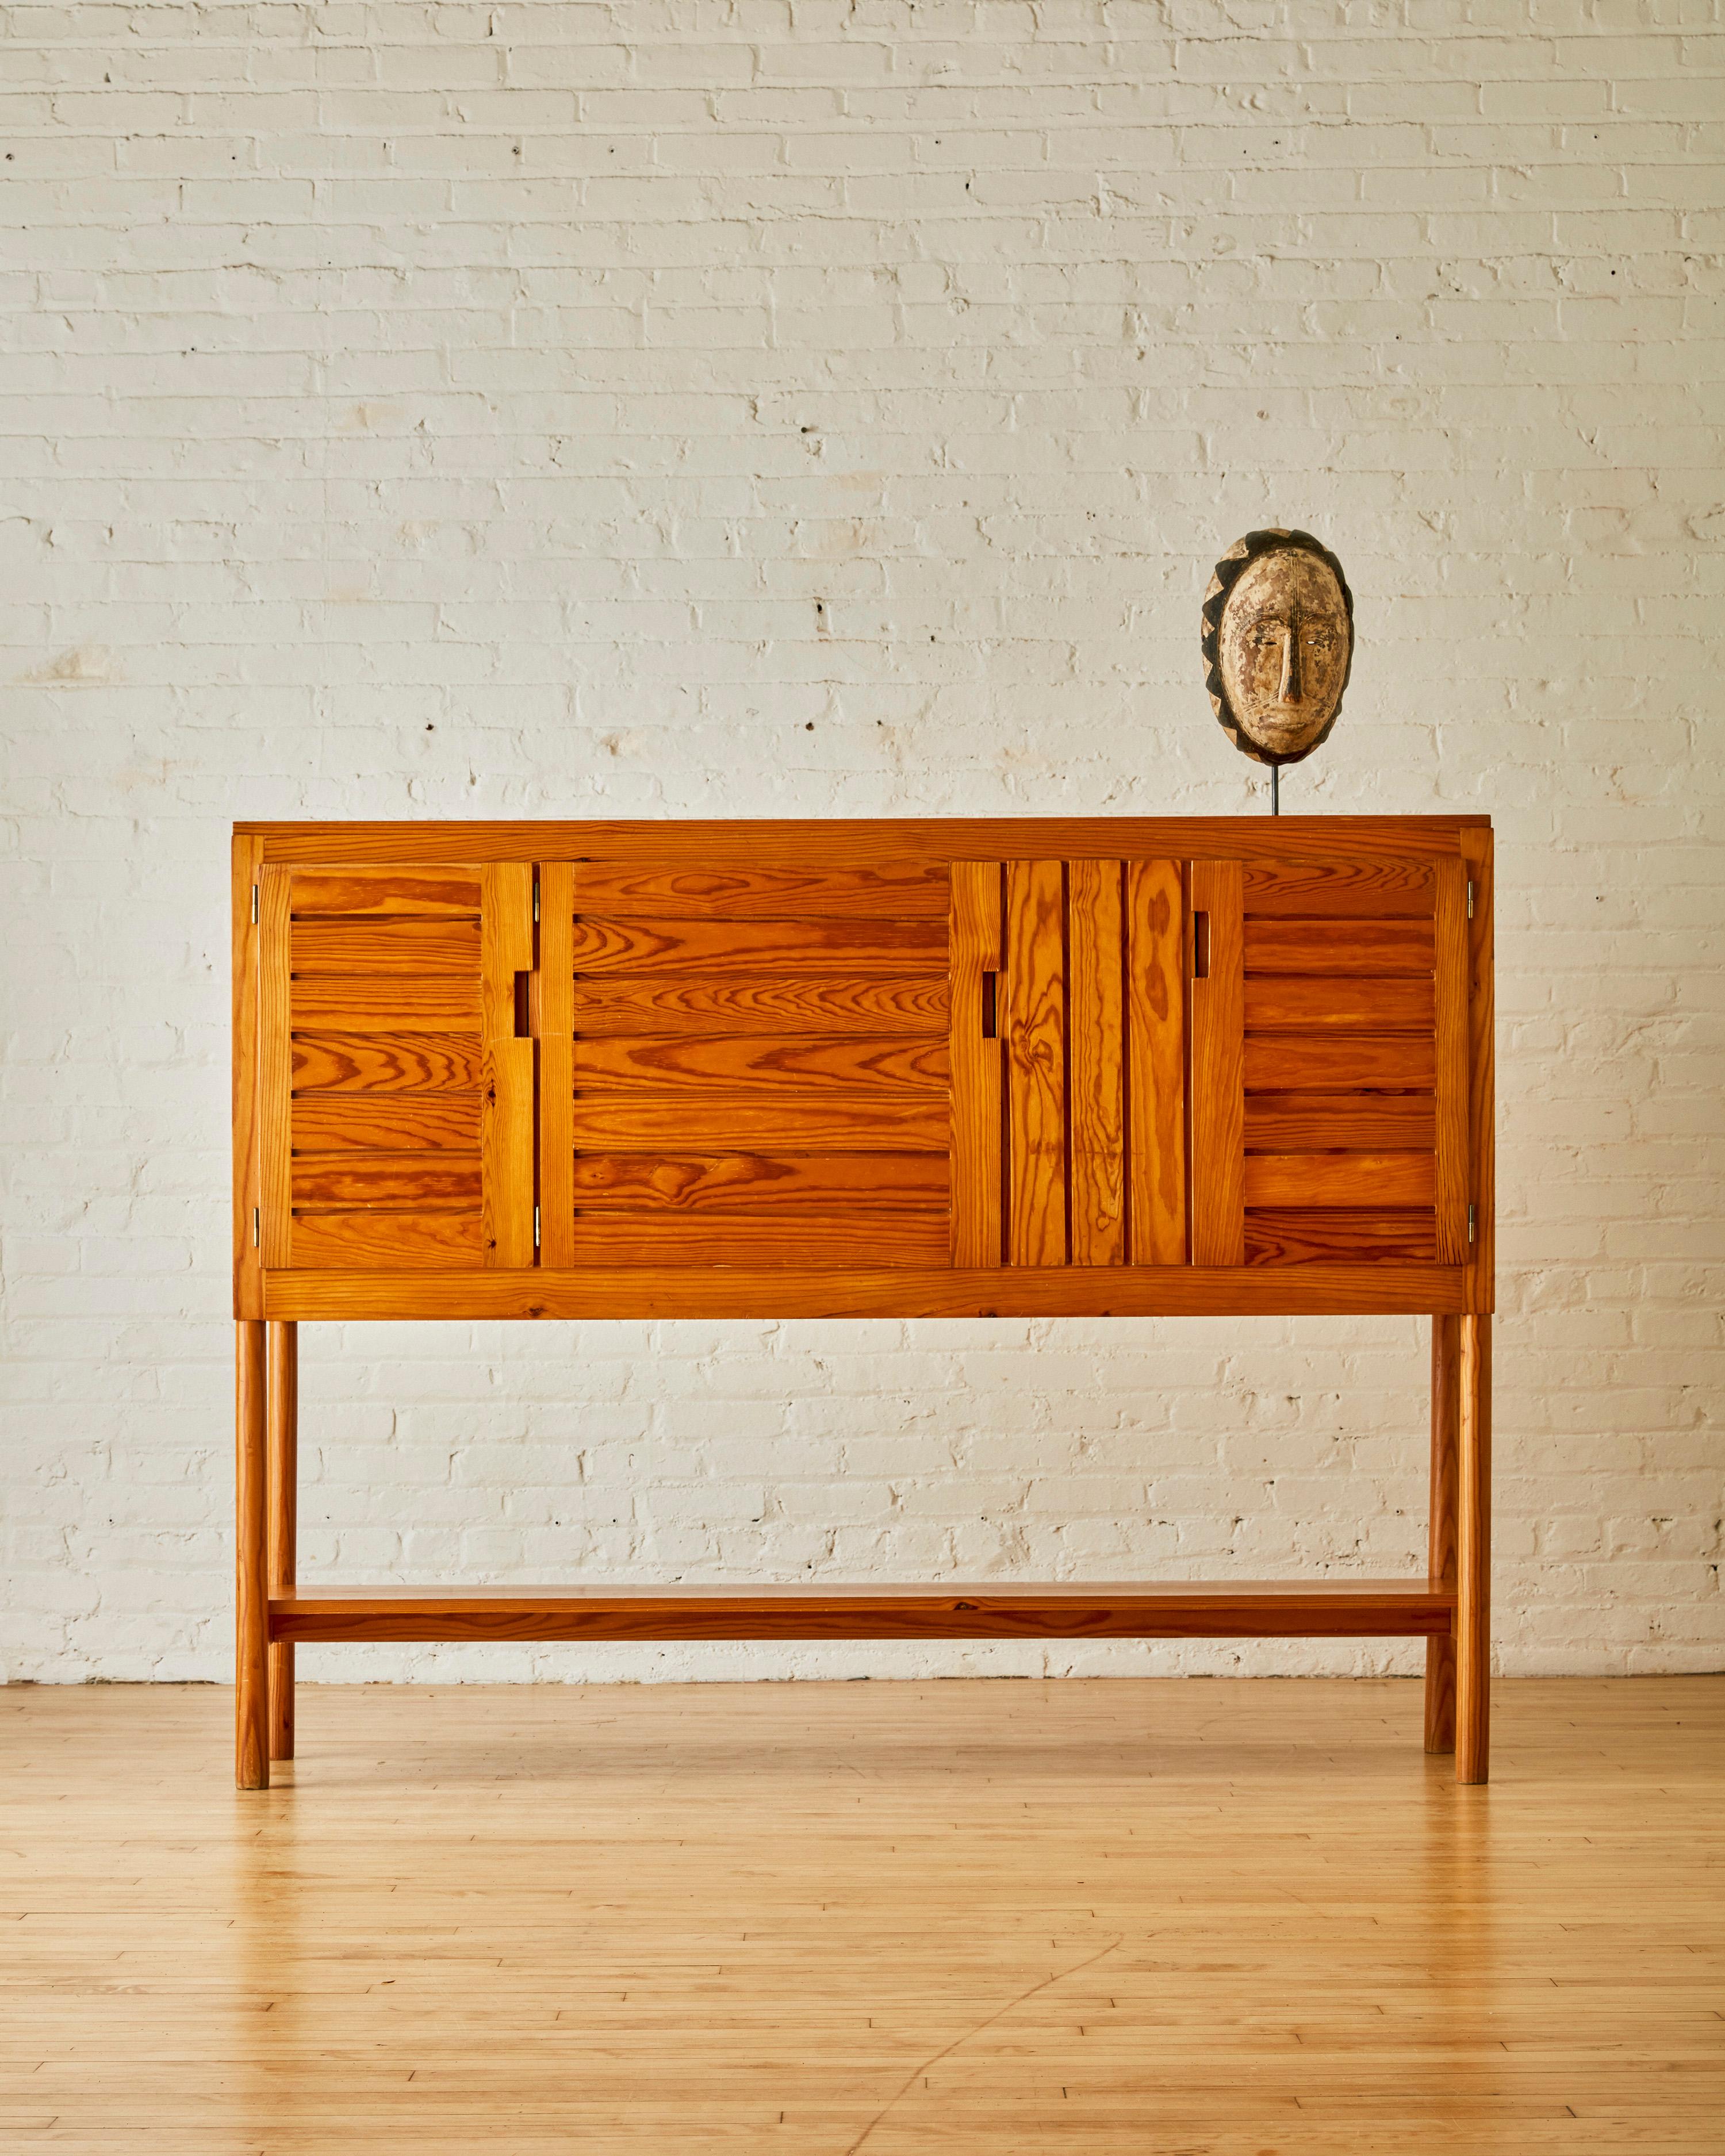 Raised Three-Door Cabinet by Pierre Gautier Delaye, with brass screw details and an elevated design.

Pierre Gautier-Delaye was an important mid century designer in France, trained at the Paris School of Decorative Arts. Delaye initially started